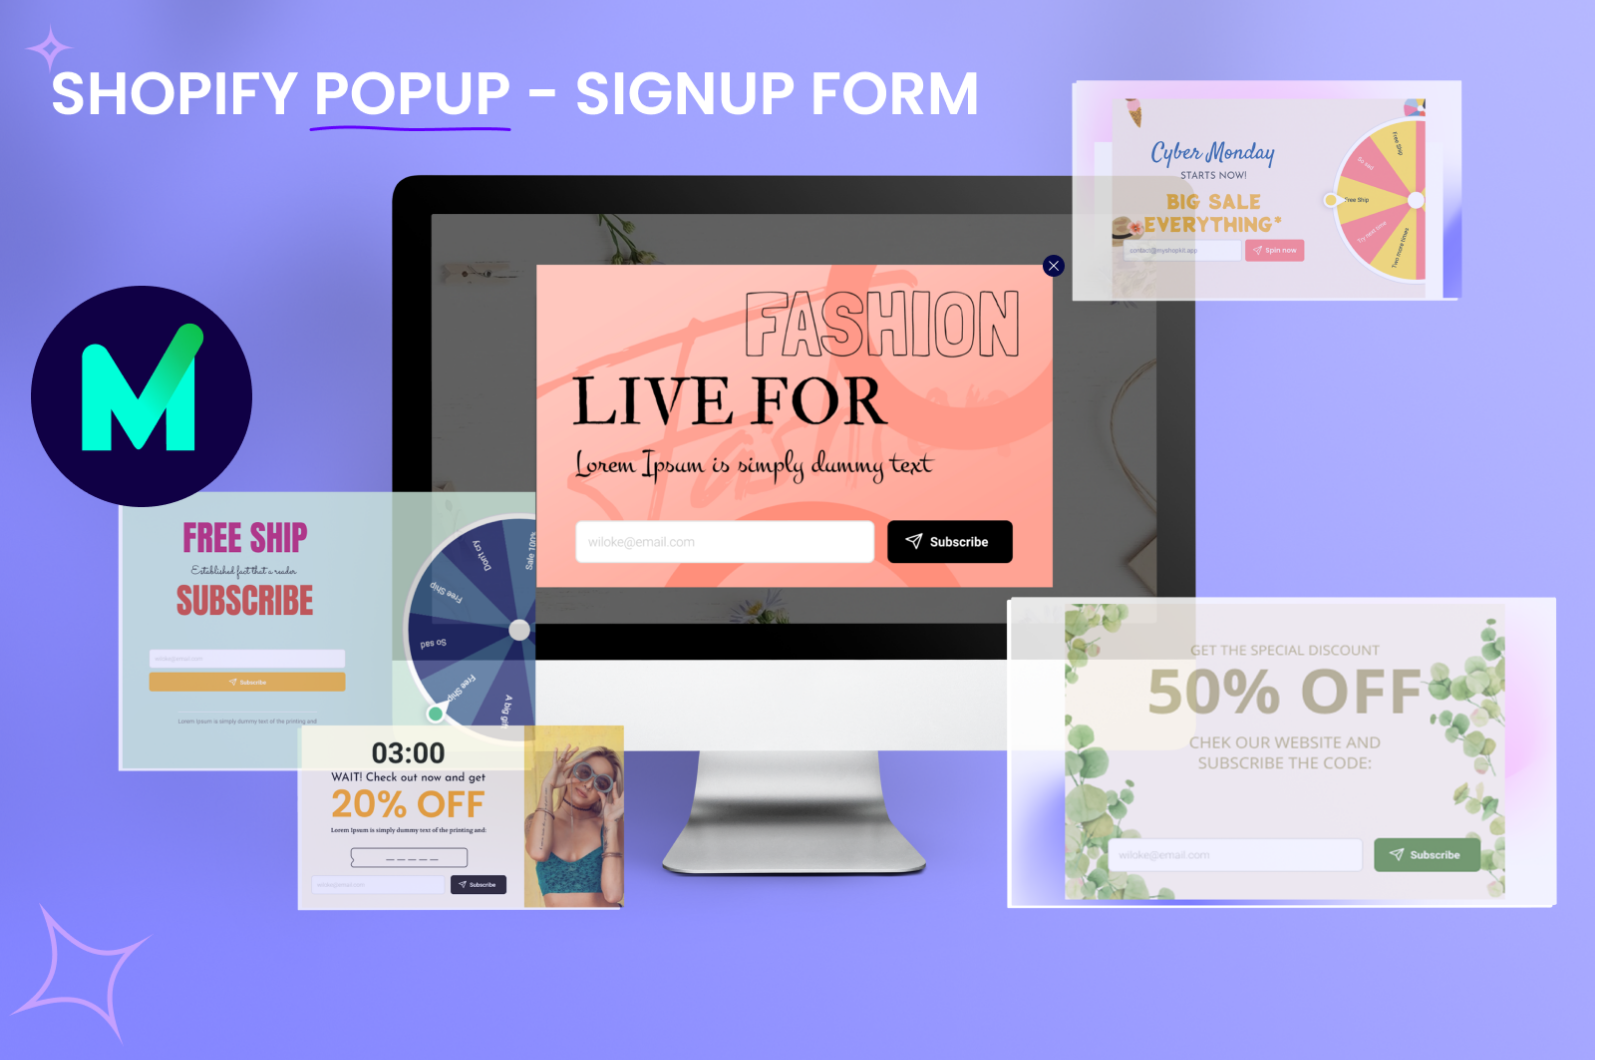 Shopify popup signup form MyShopKit - Ecommerce Solution